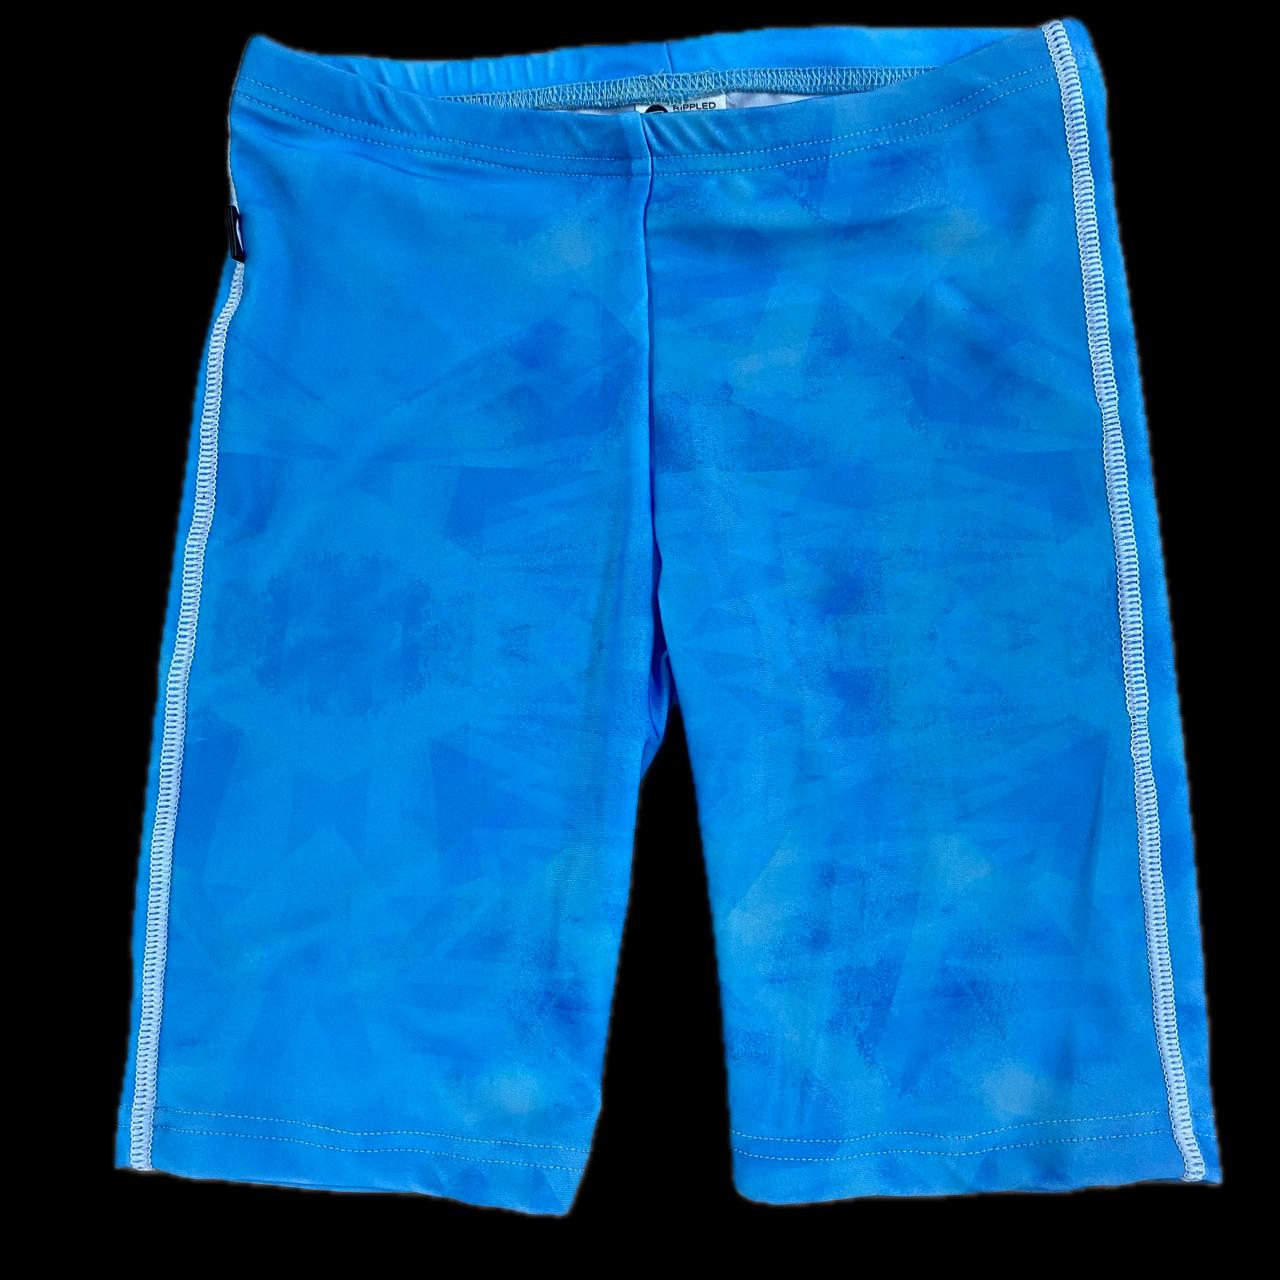 Rippled Effect Mens Jammers Blue Prism